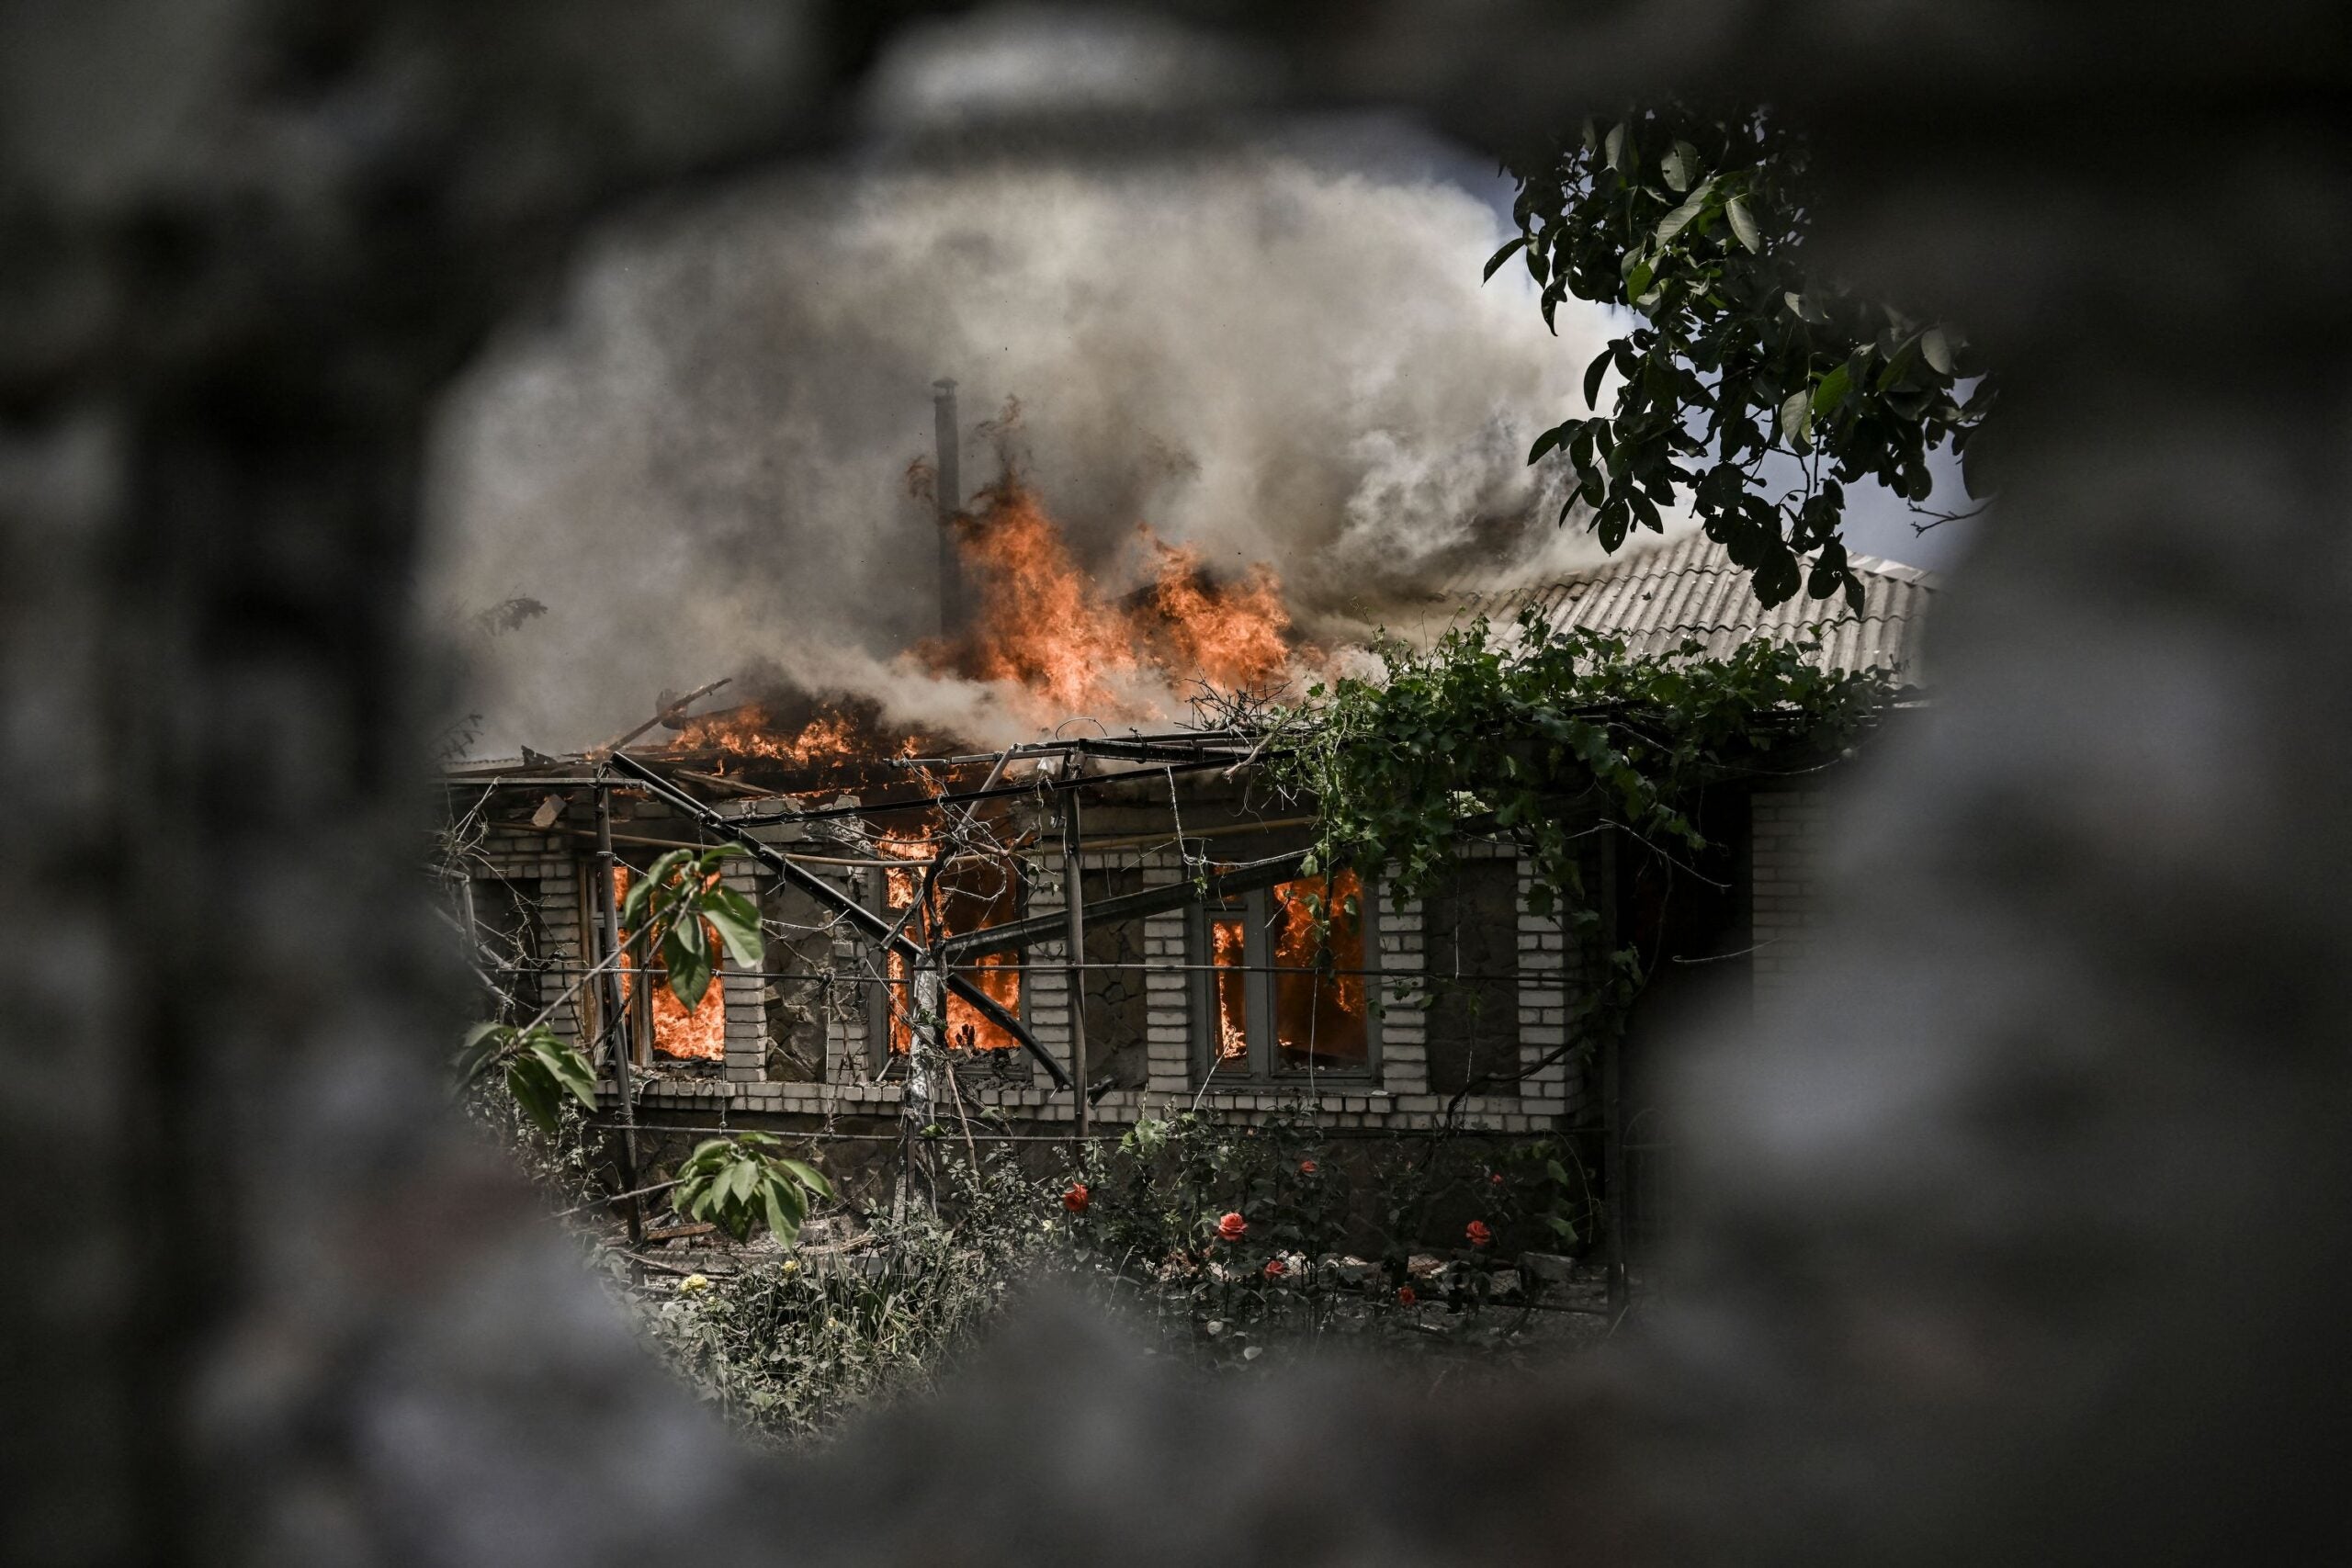 A house burns after being shelled during an artillery duel between Ukrainian and Russian troops in the city of Lysychansk, eastern Ukrainian region of Donbas, on June 11, 2022. (Photo by ARIS MESSINIS / AFP) (Photo by ARIS MESSINIS/AFP via Getty Images)